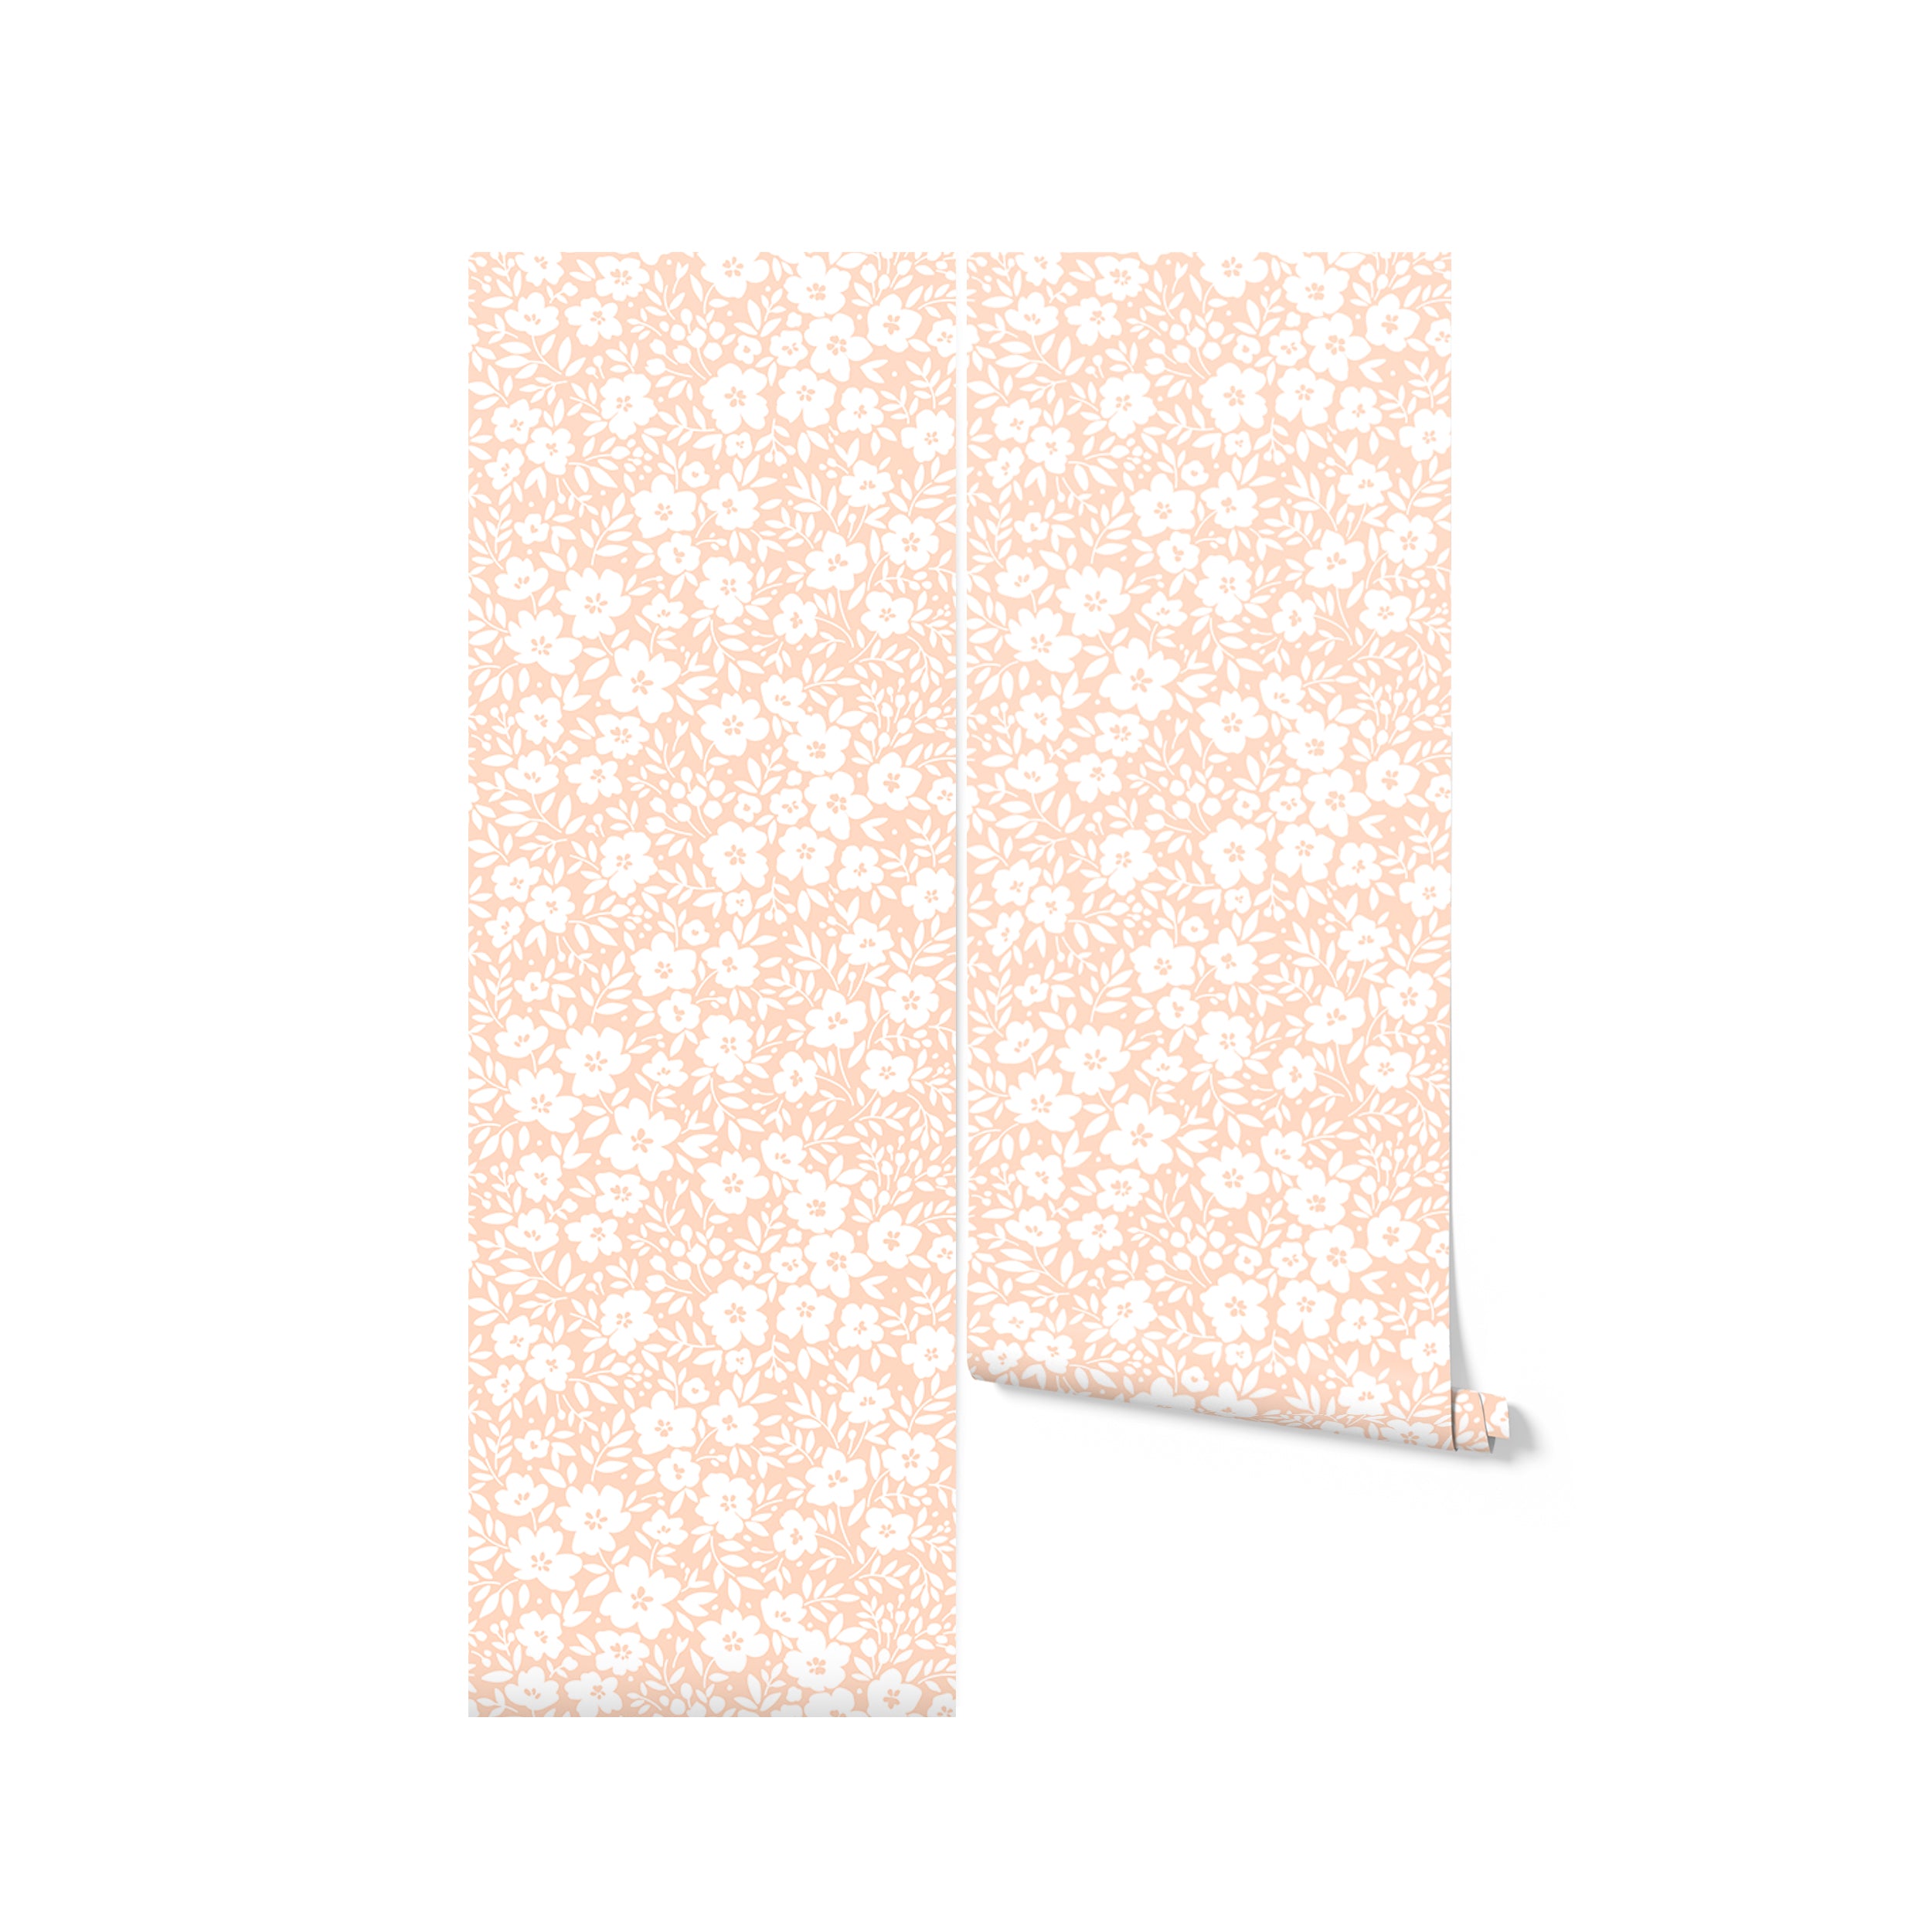 Multiple rolls of the Flower Power Wallpaper in Light Peach, partially unrolled to showcase the continuous floral pattern. The wallpaper's light peach and white design offers a versatile option for adding a gentle, decorative touch to any room.